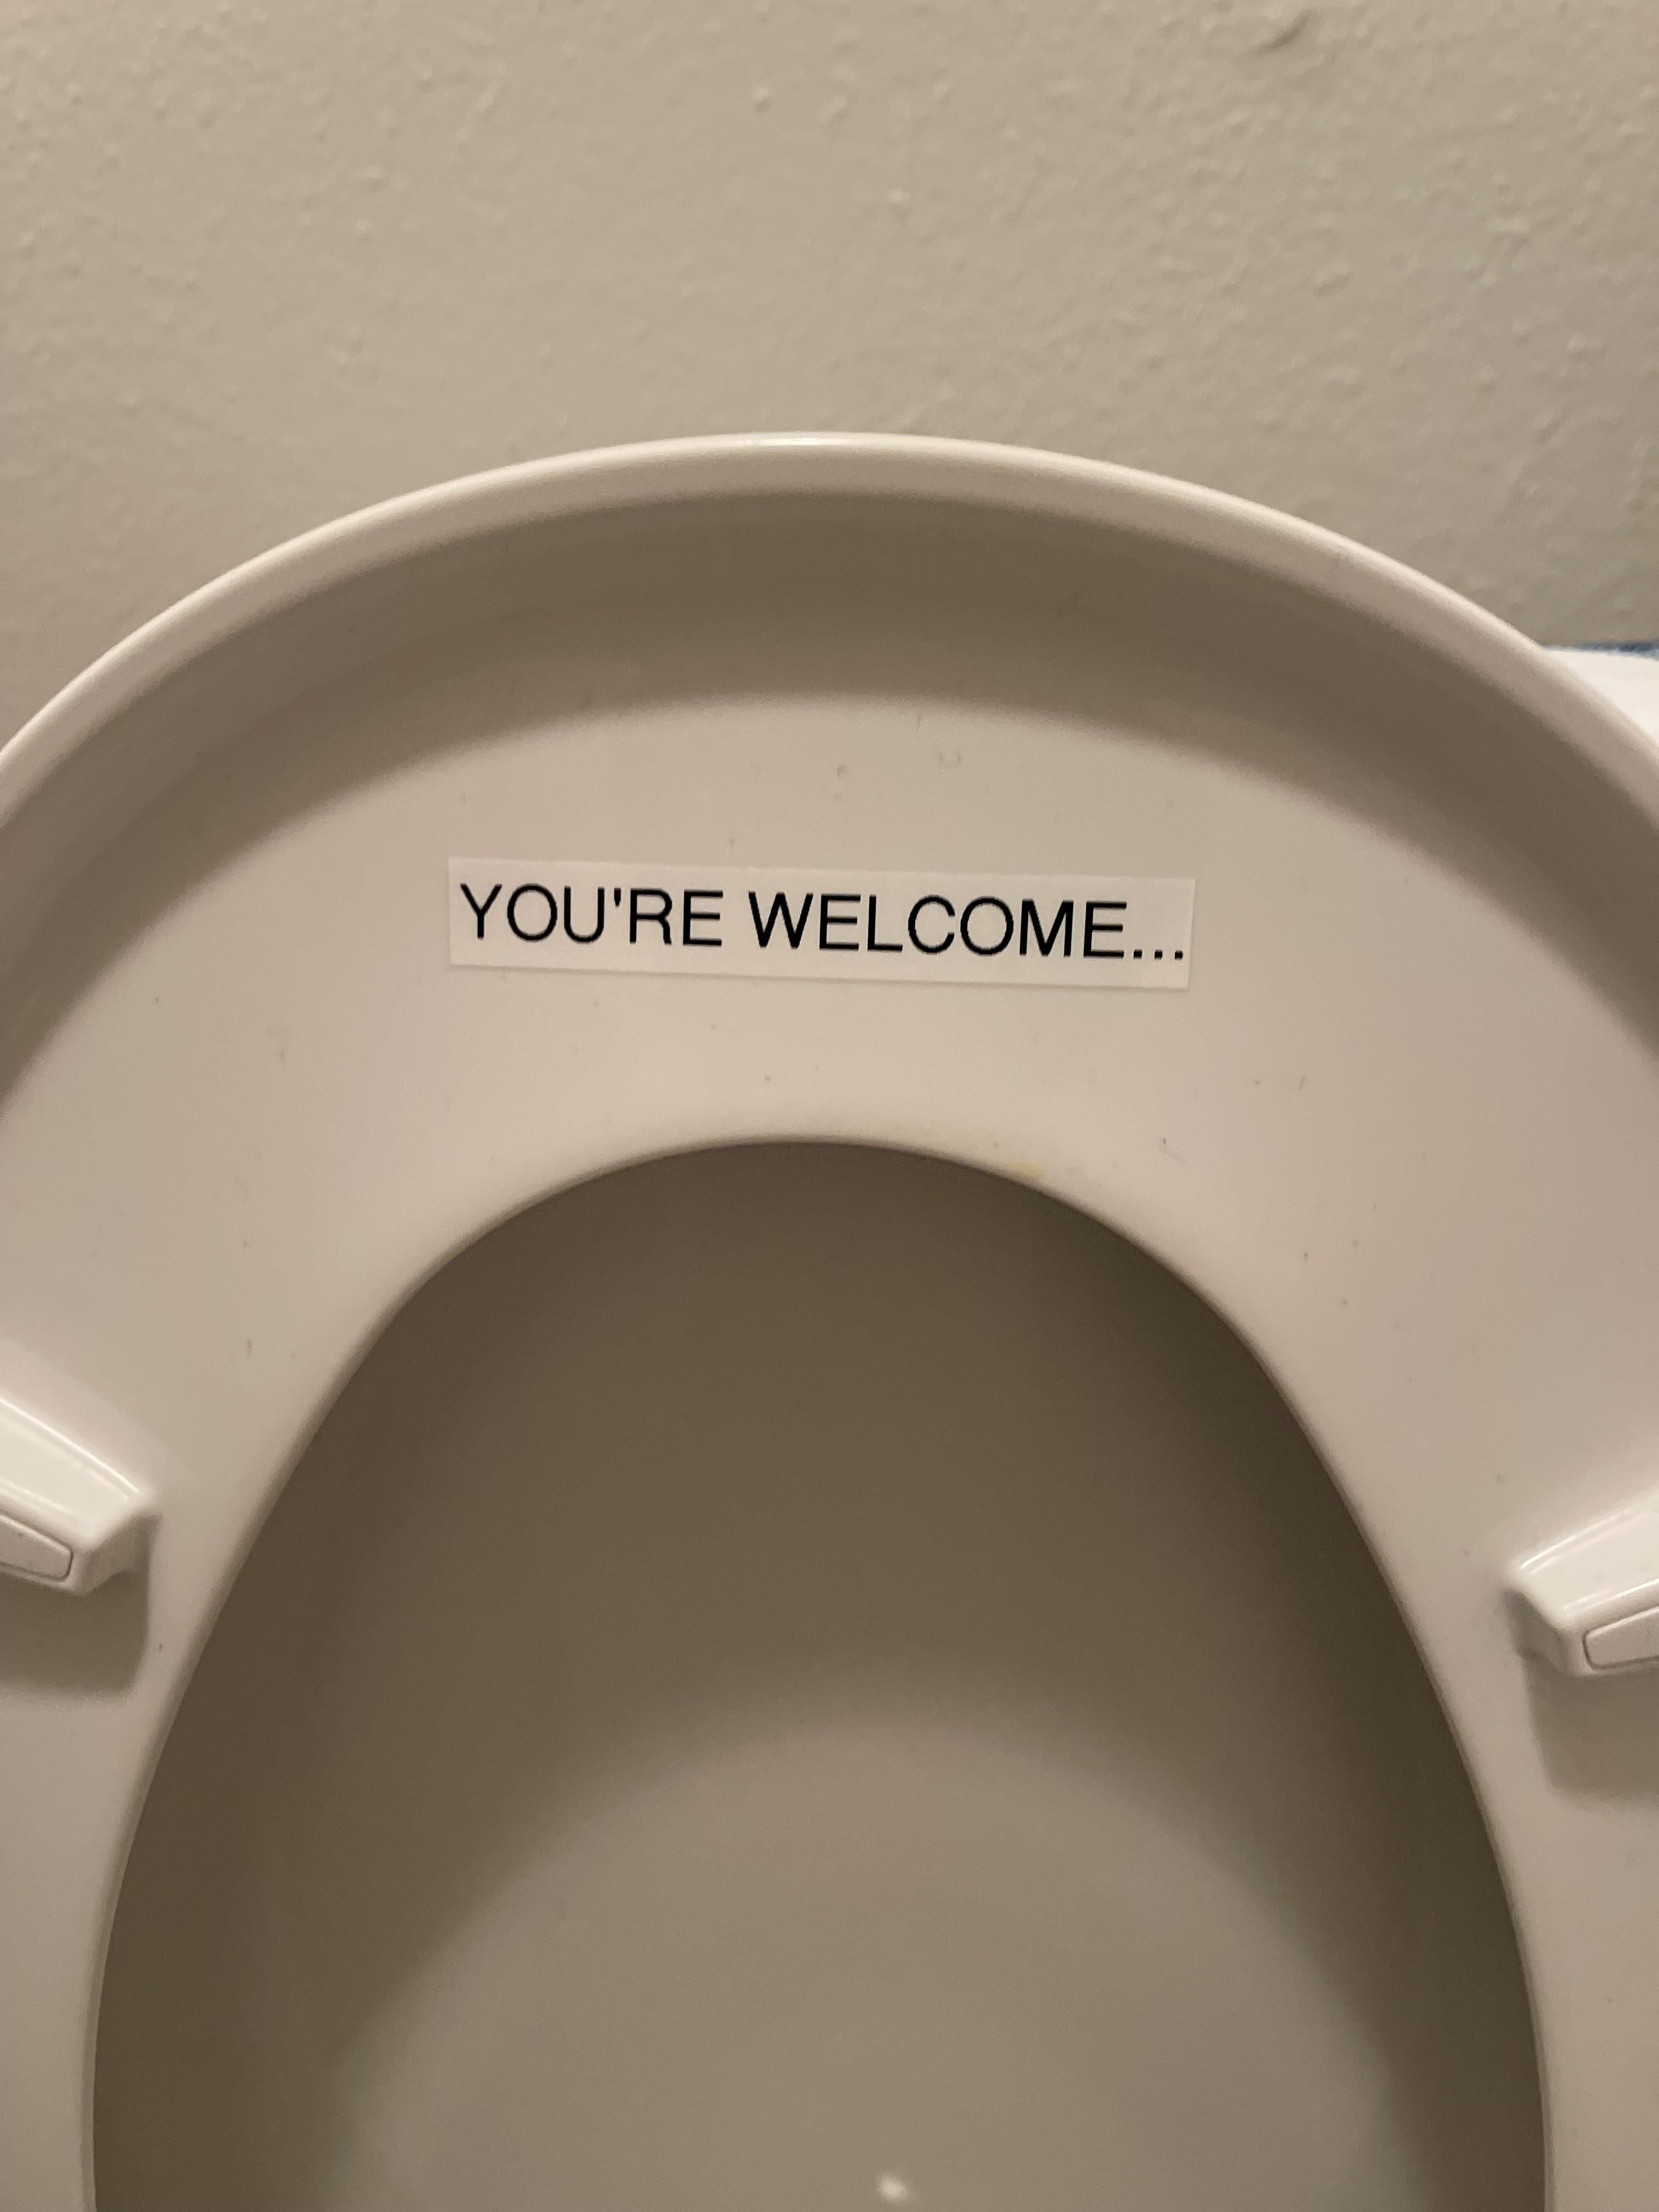 My gf complained of the toilet seat being up, and I told her she’s the minority in this household. This was her reply…